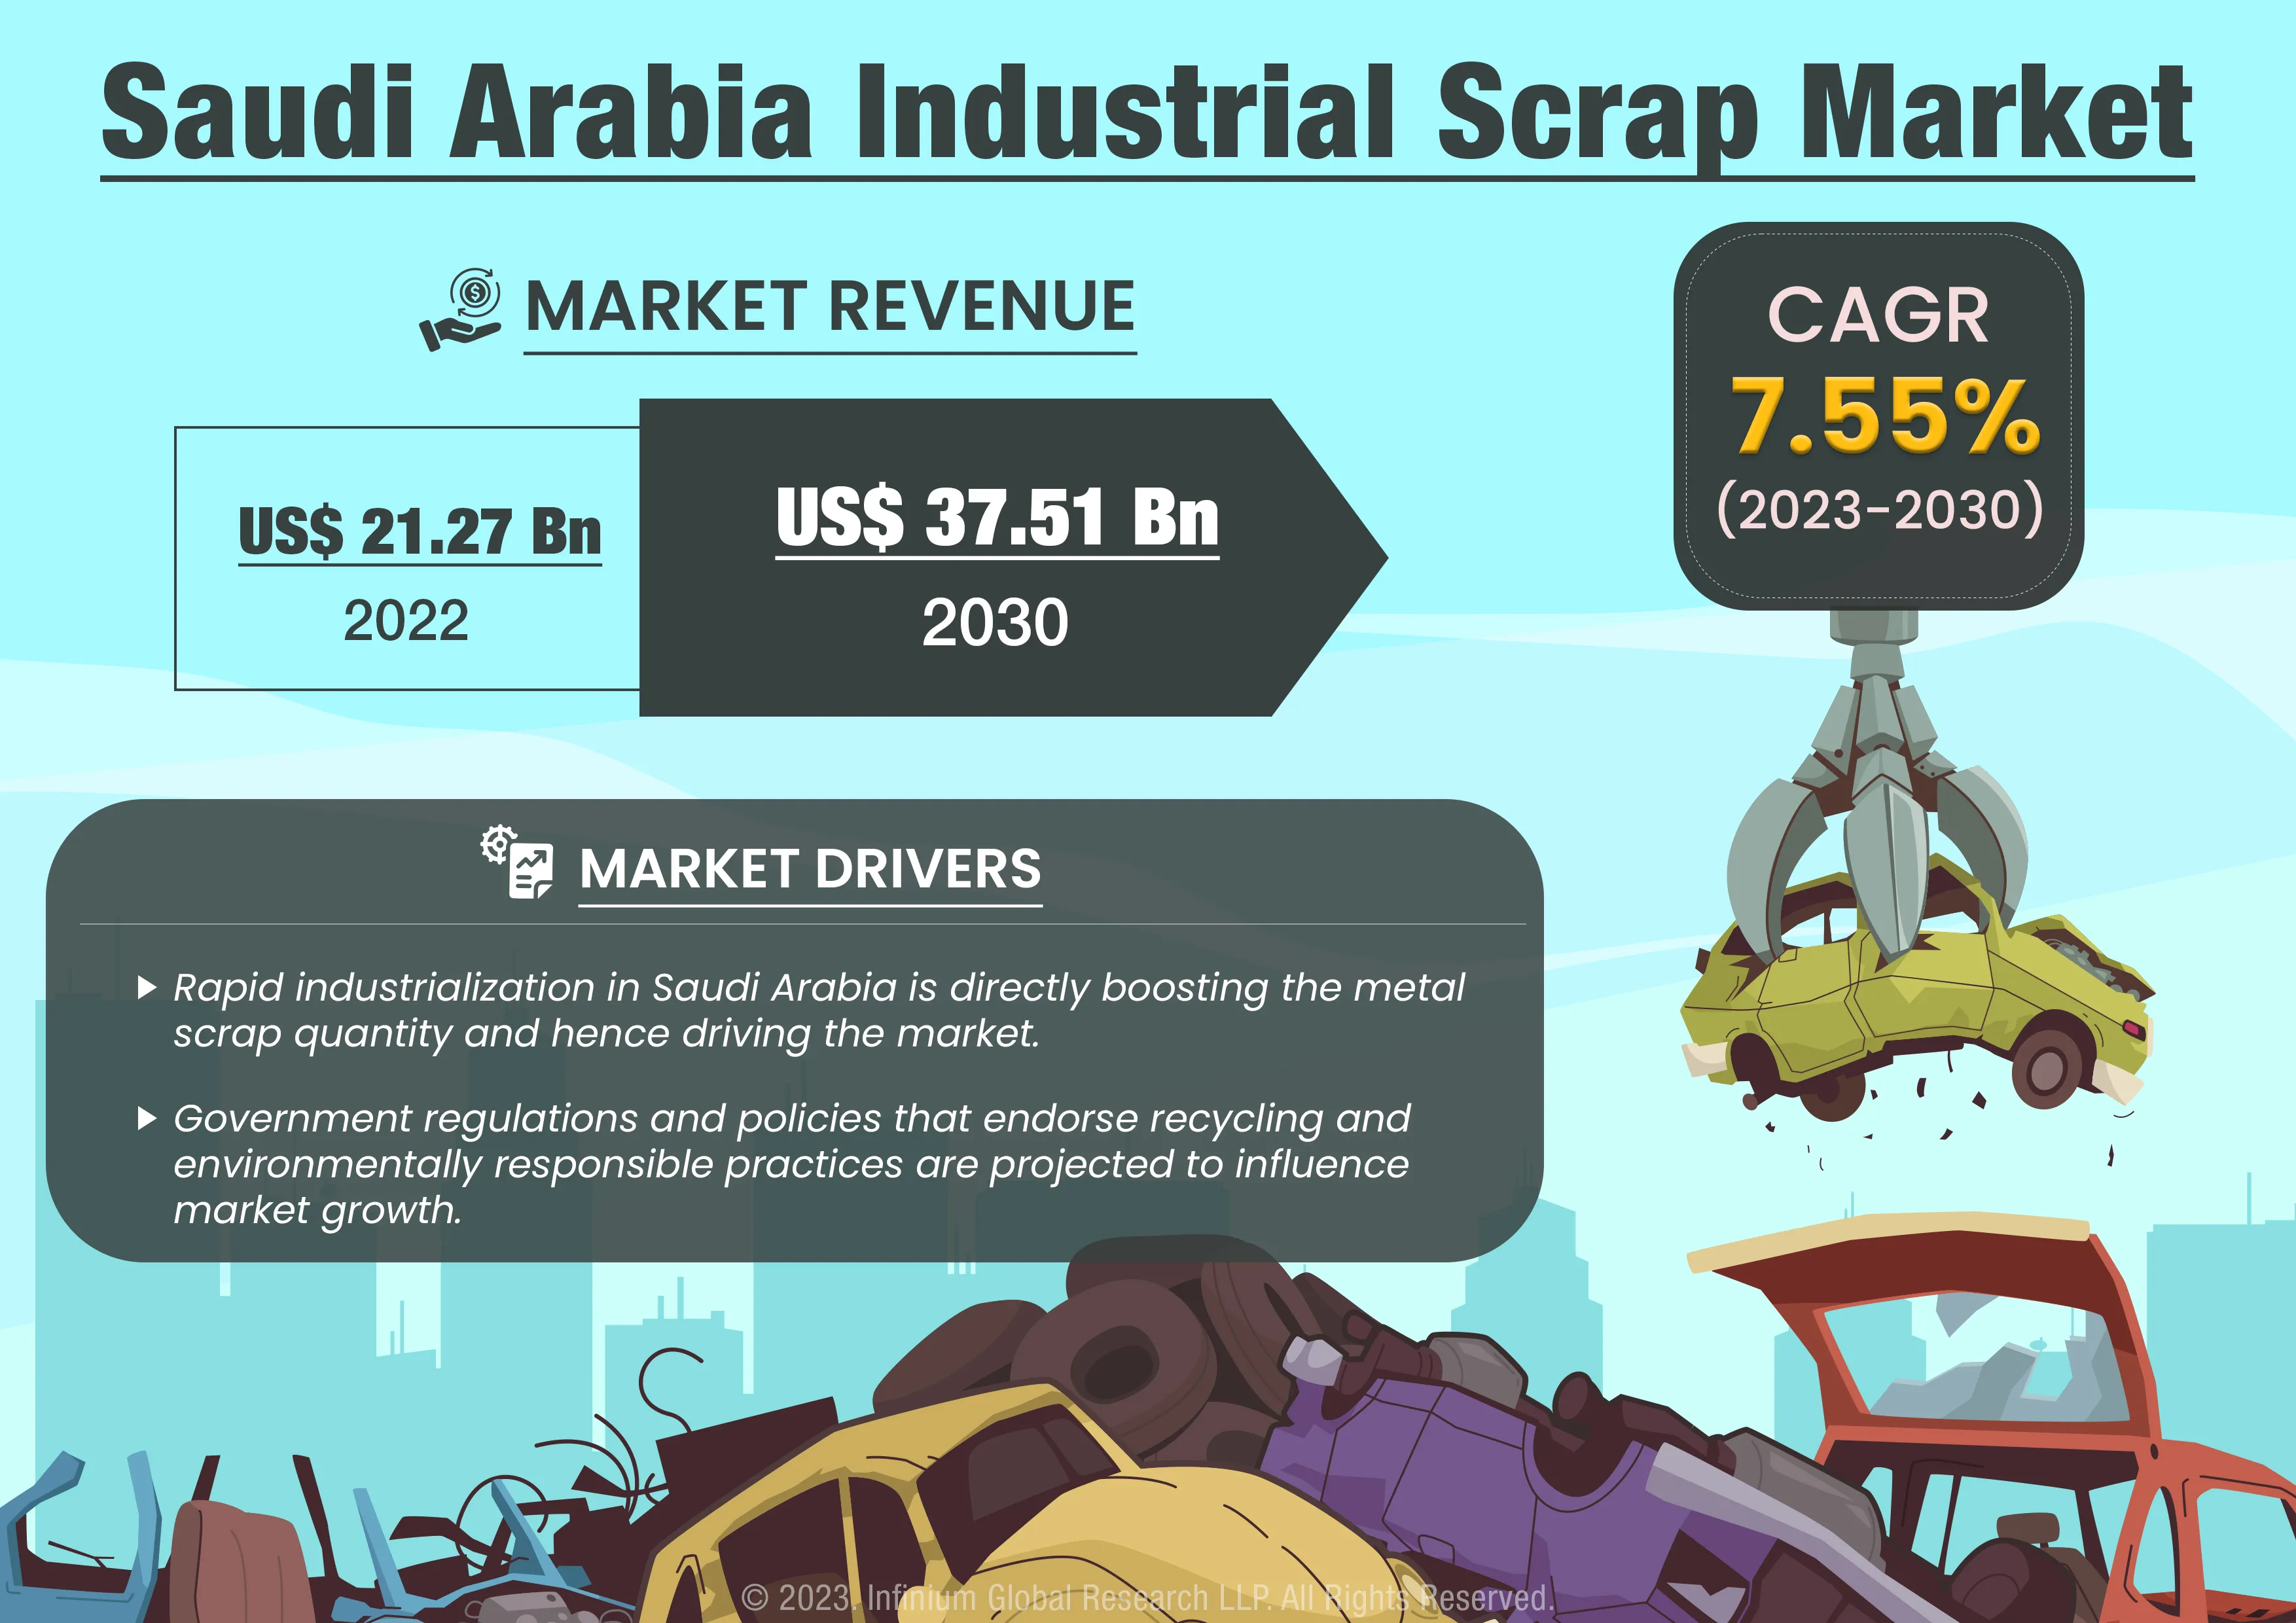 Saudi Arabia Industrial Scrap Market Was Valued at USD 21.27 Billion in 2022 and is Expected to Reach USD 37.51 Billion by 2030 and Grow at a CAGR of 7.55% Over the Forecast Period 2023-2030.